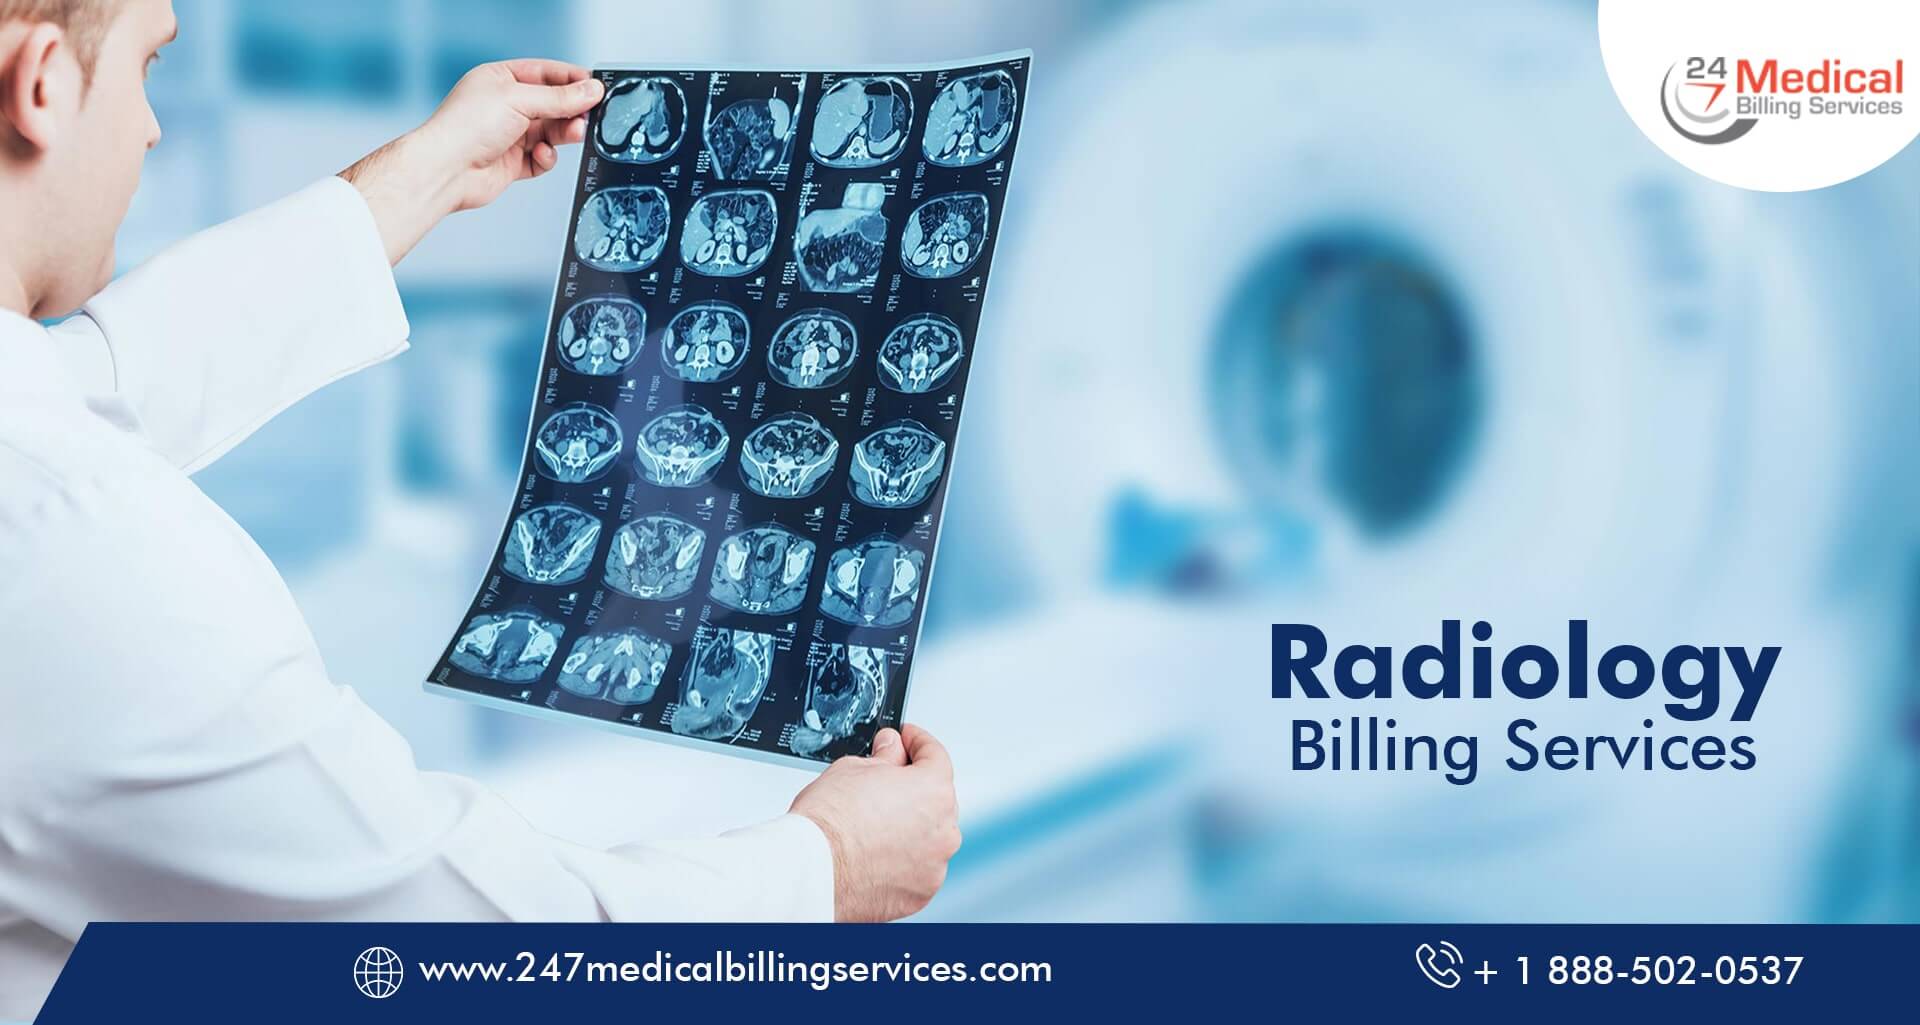  Radiology Billing Services in Baltimore, Maryland (MD)